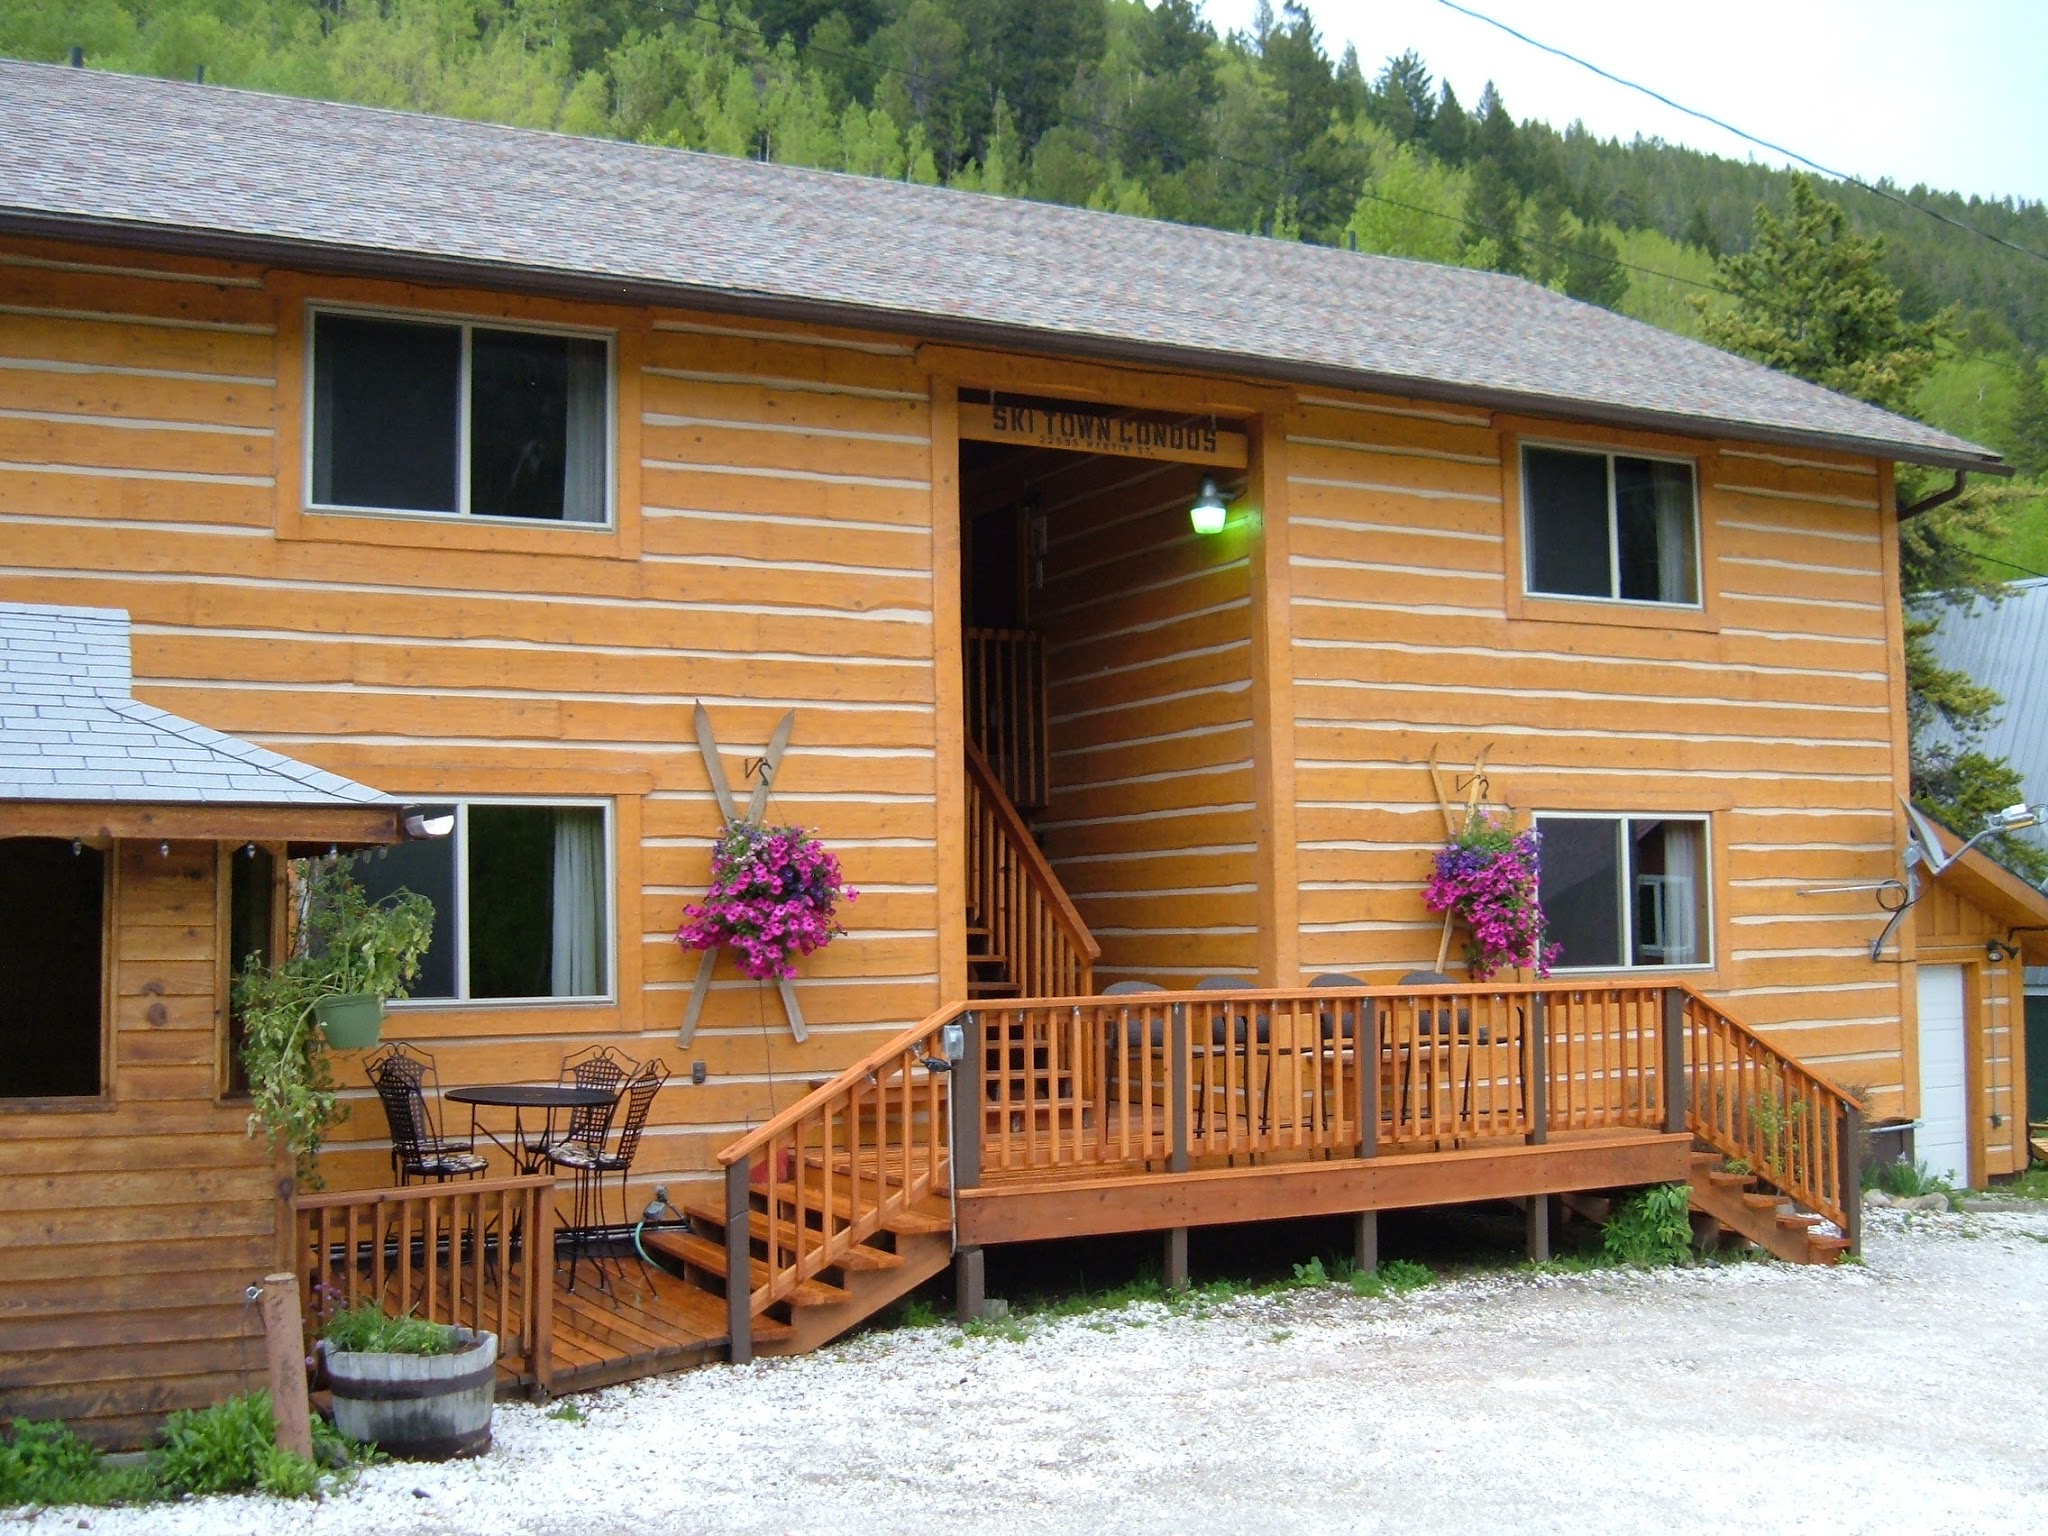 Log sided condos, autum gold, with 2 large hanging baskets of pink flowing flowers.